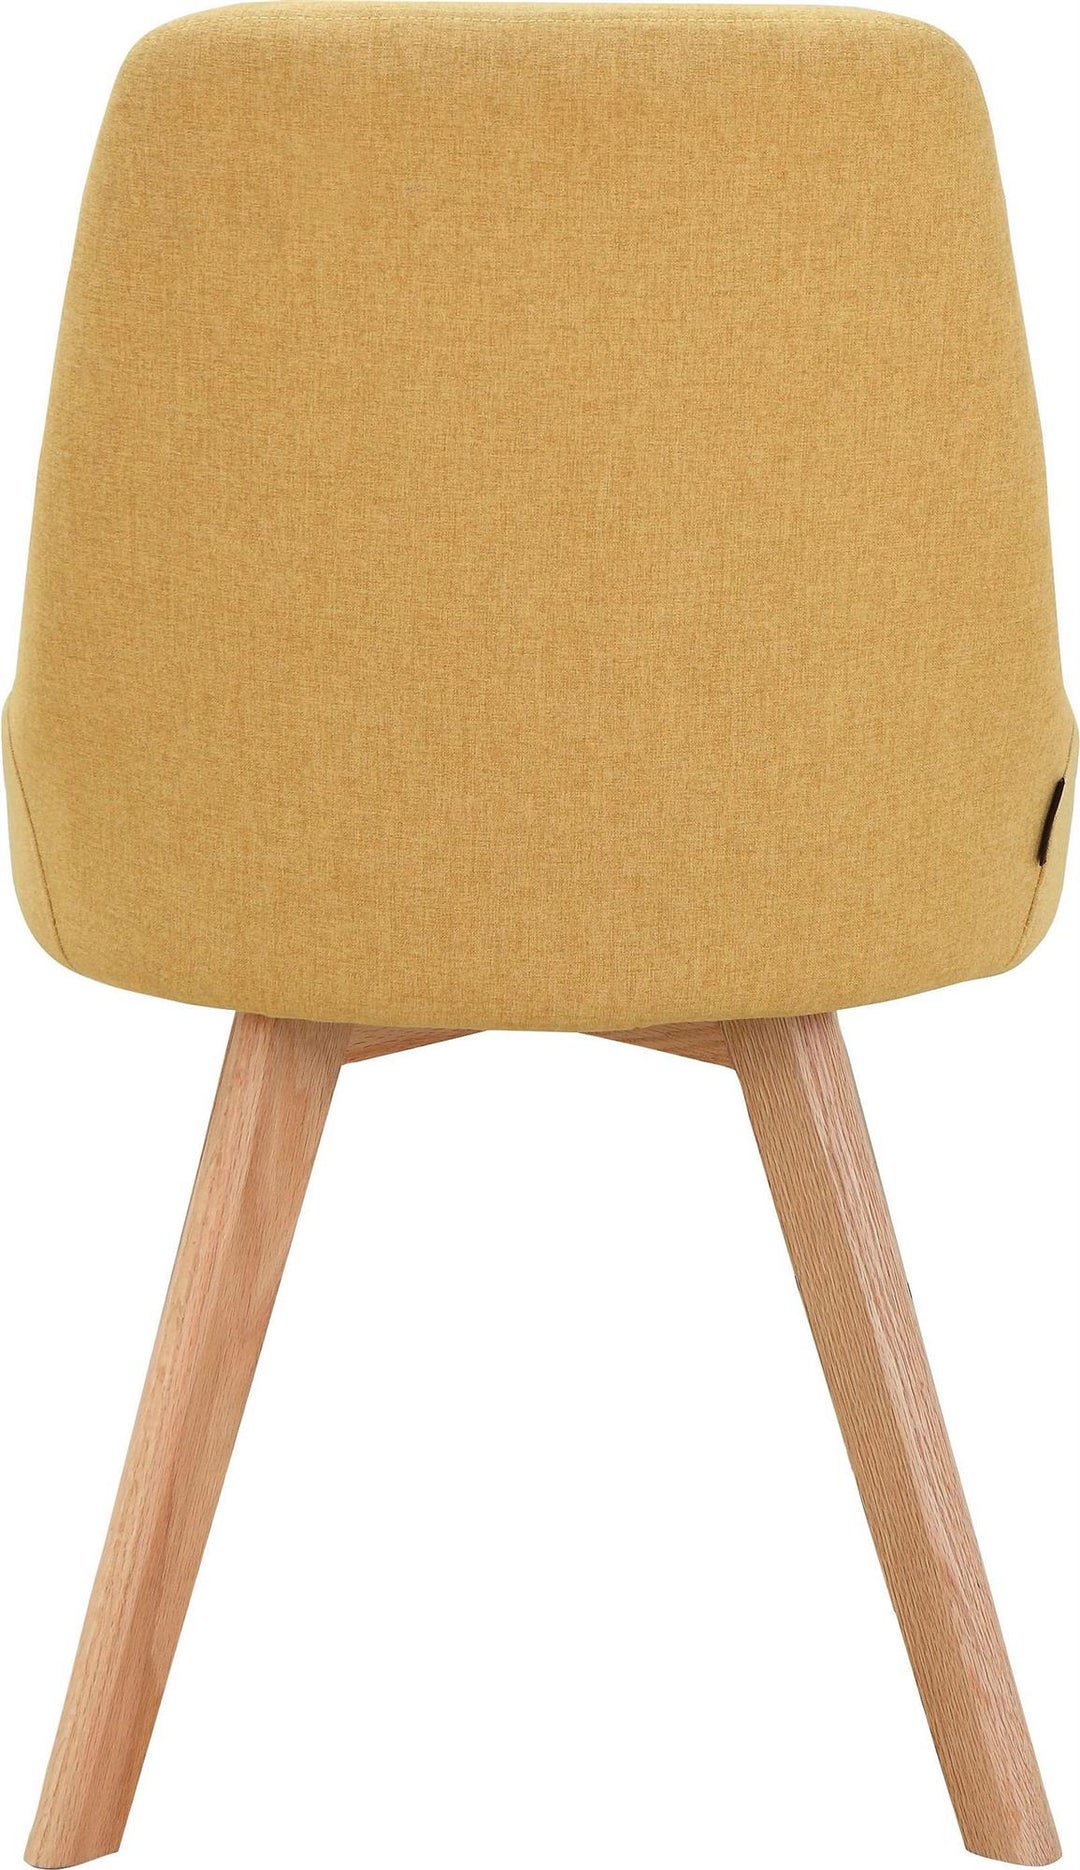 Thora Dining Chair with Oak Legs, Set of 2 - Mustard Yellow - Set of 2